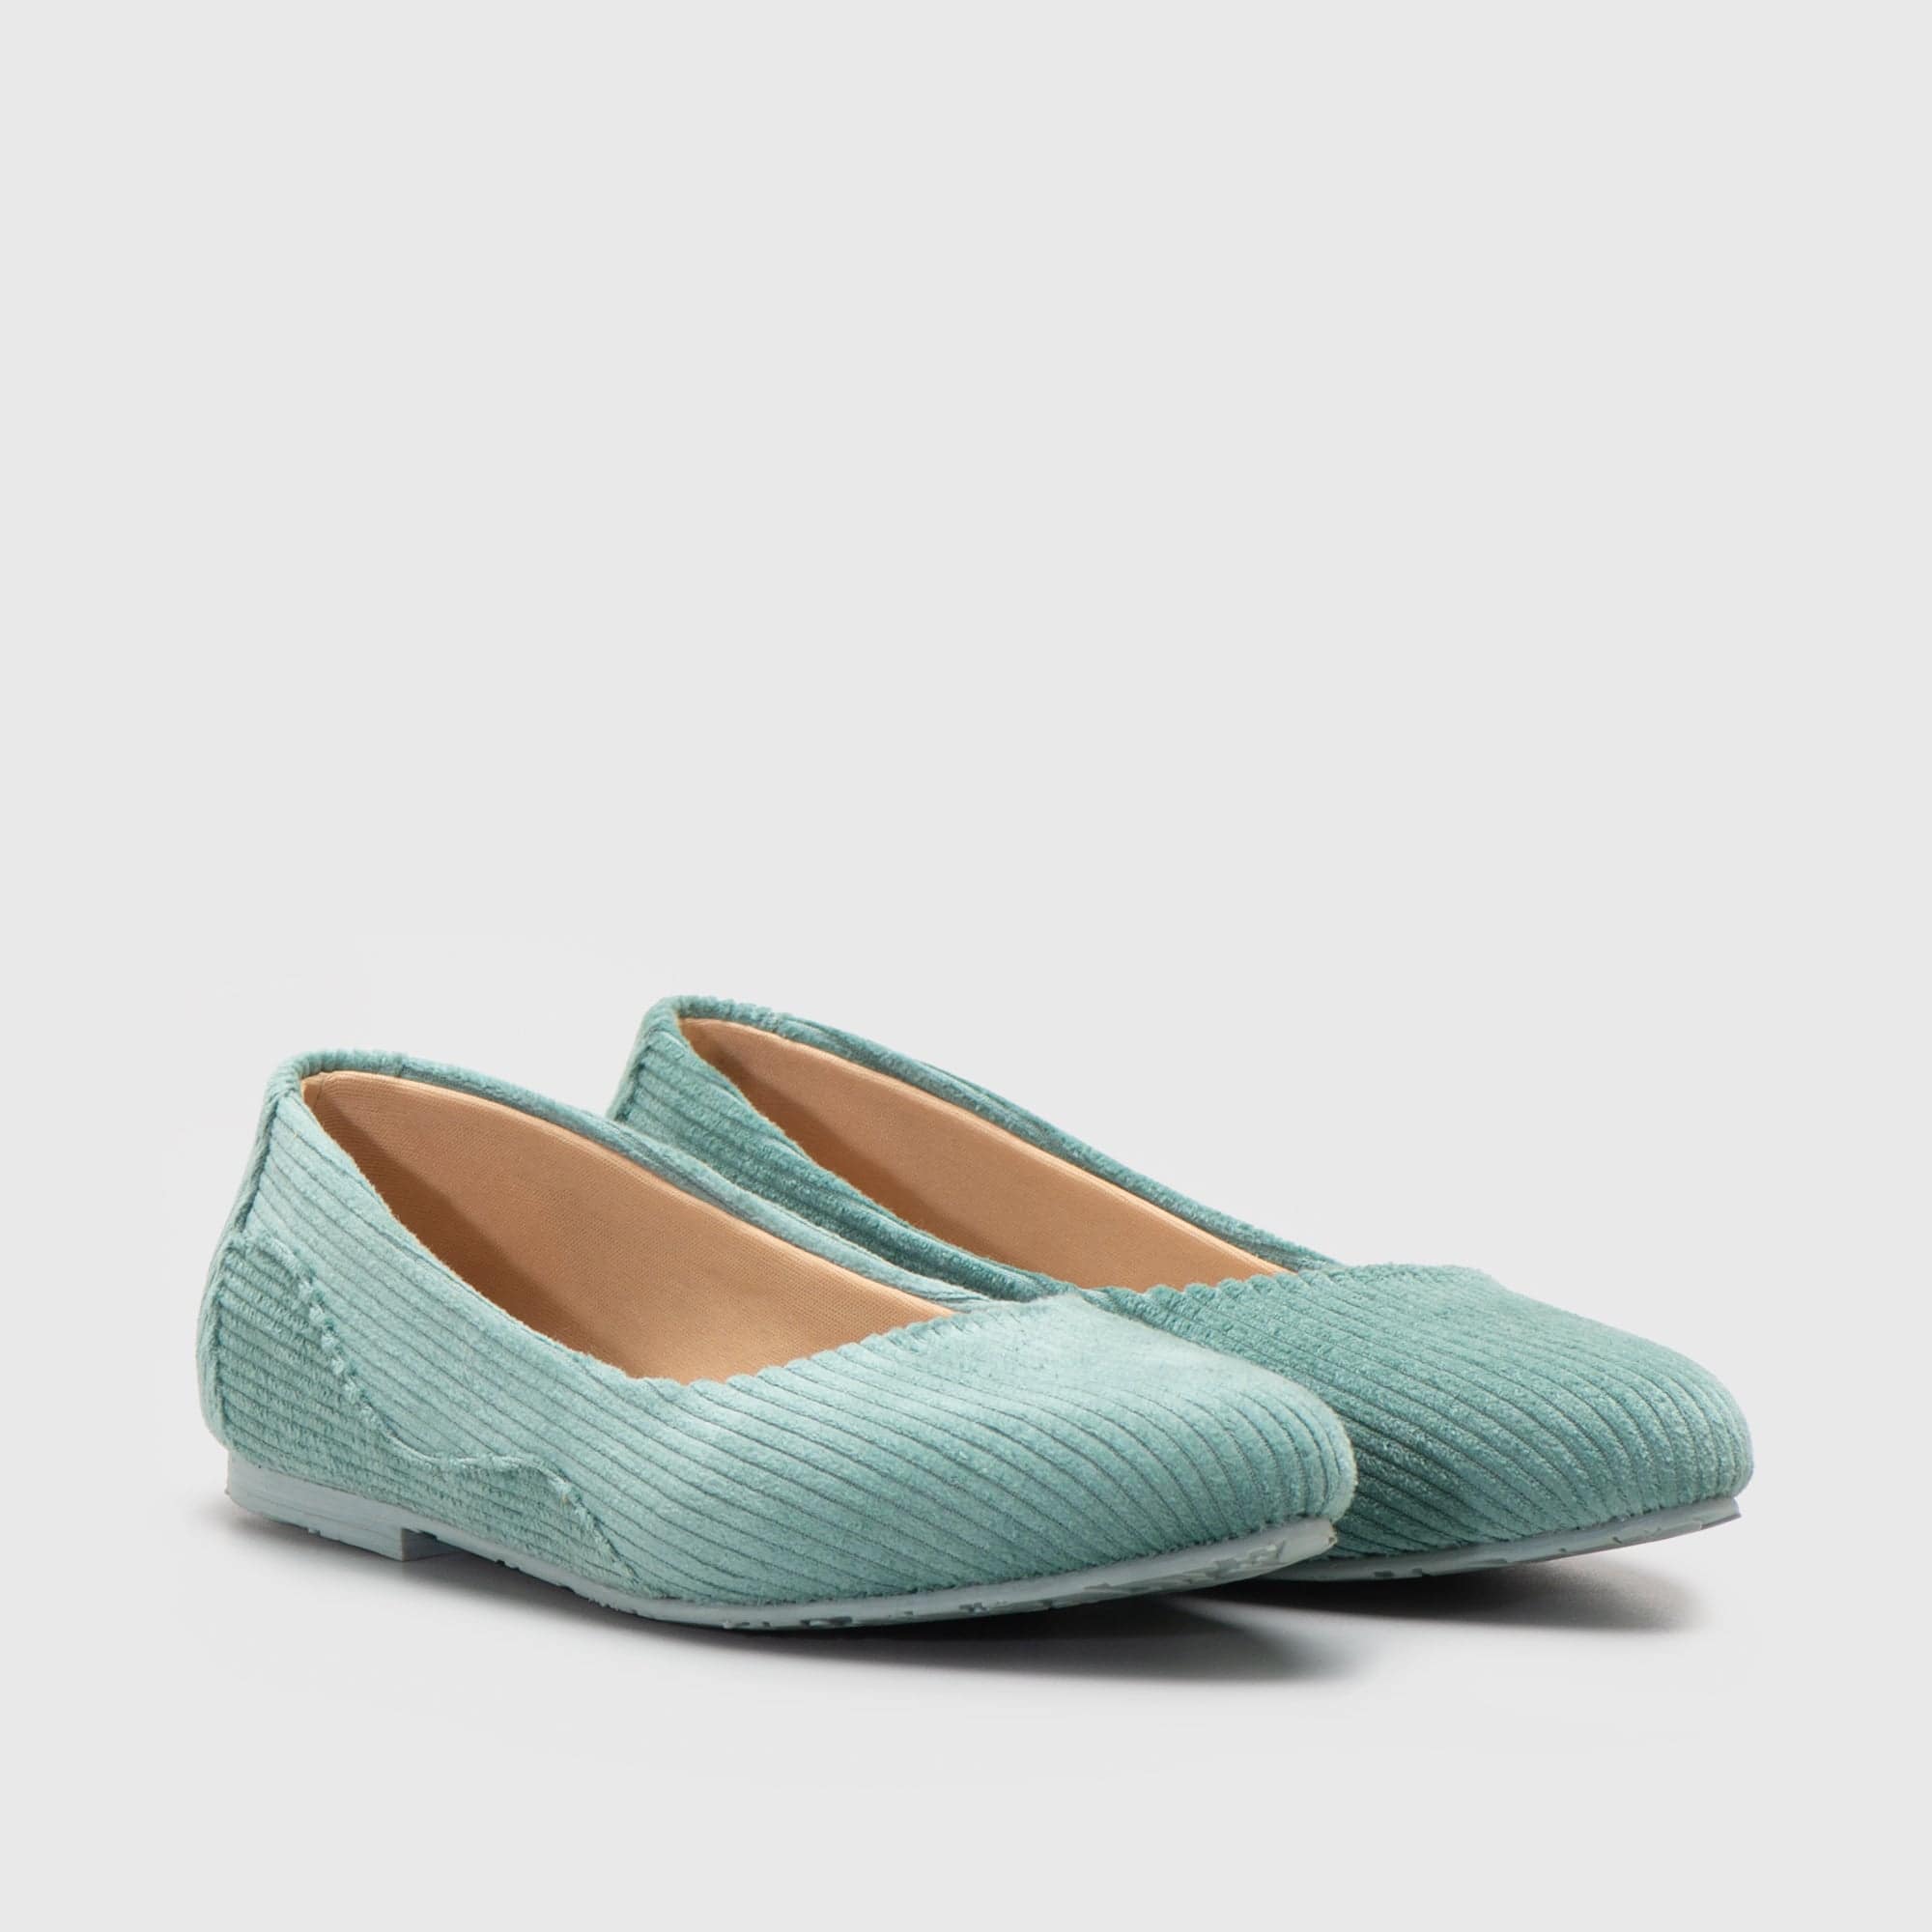 Adorable Projects Official Flat shoes 35 / Tosca Carson Flat Shoes Tosca